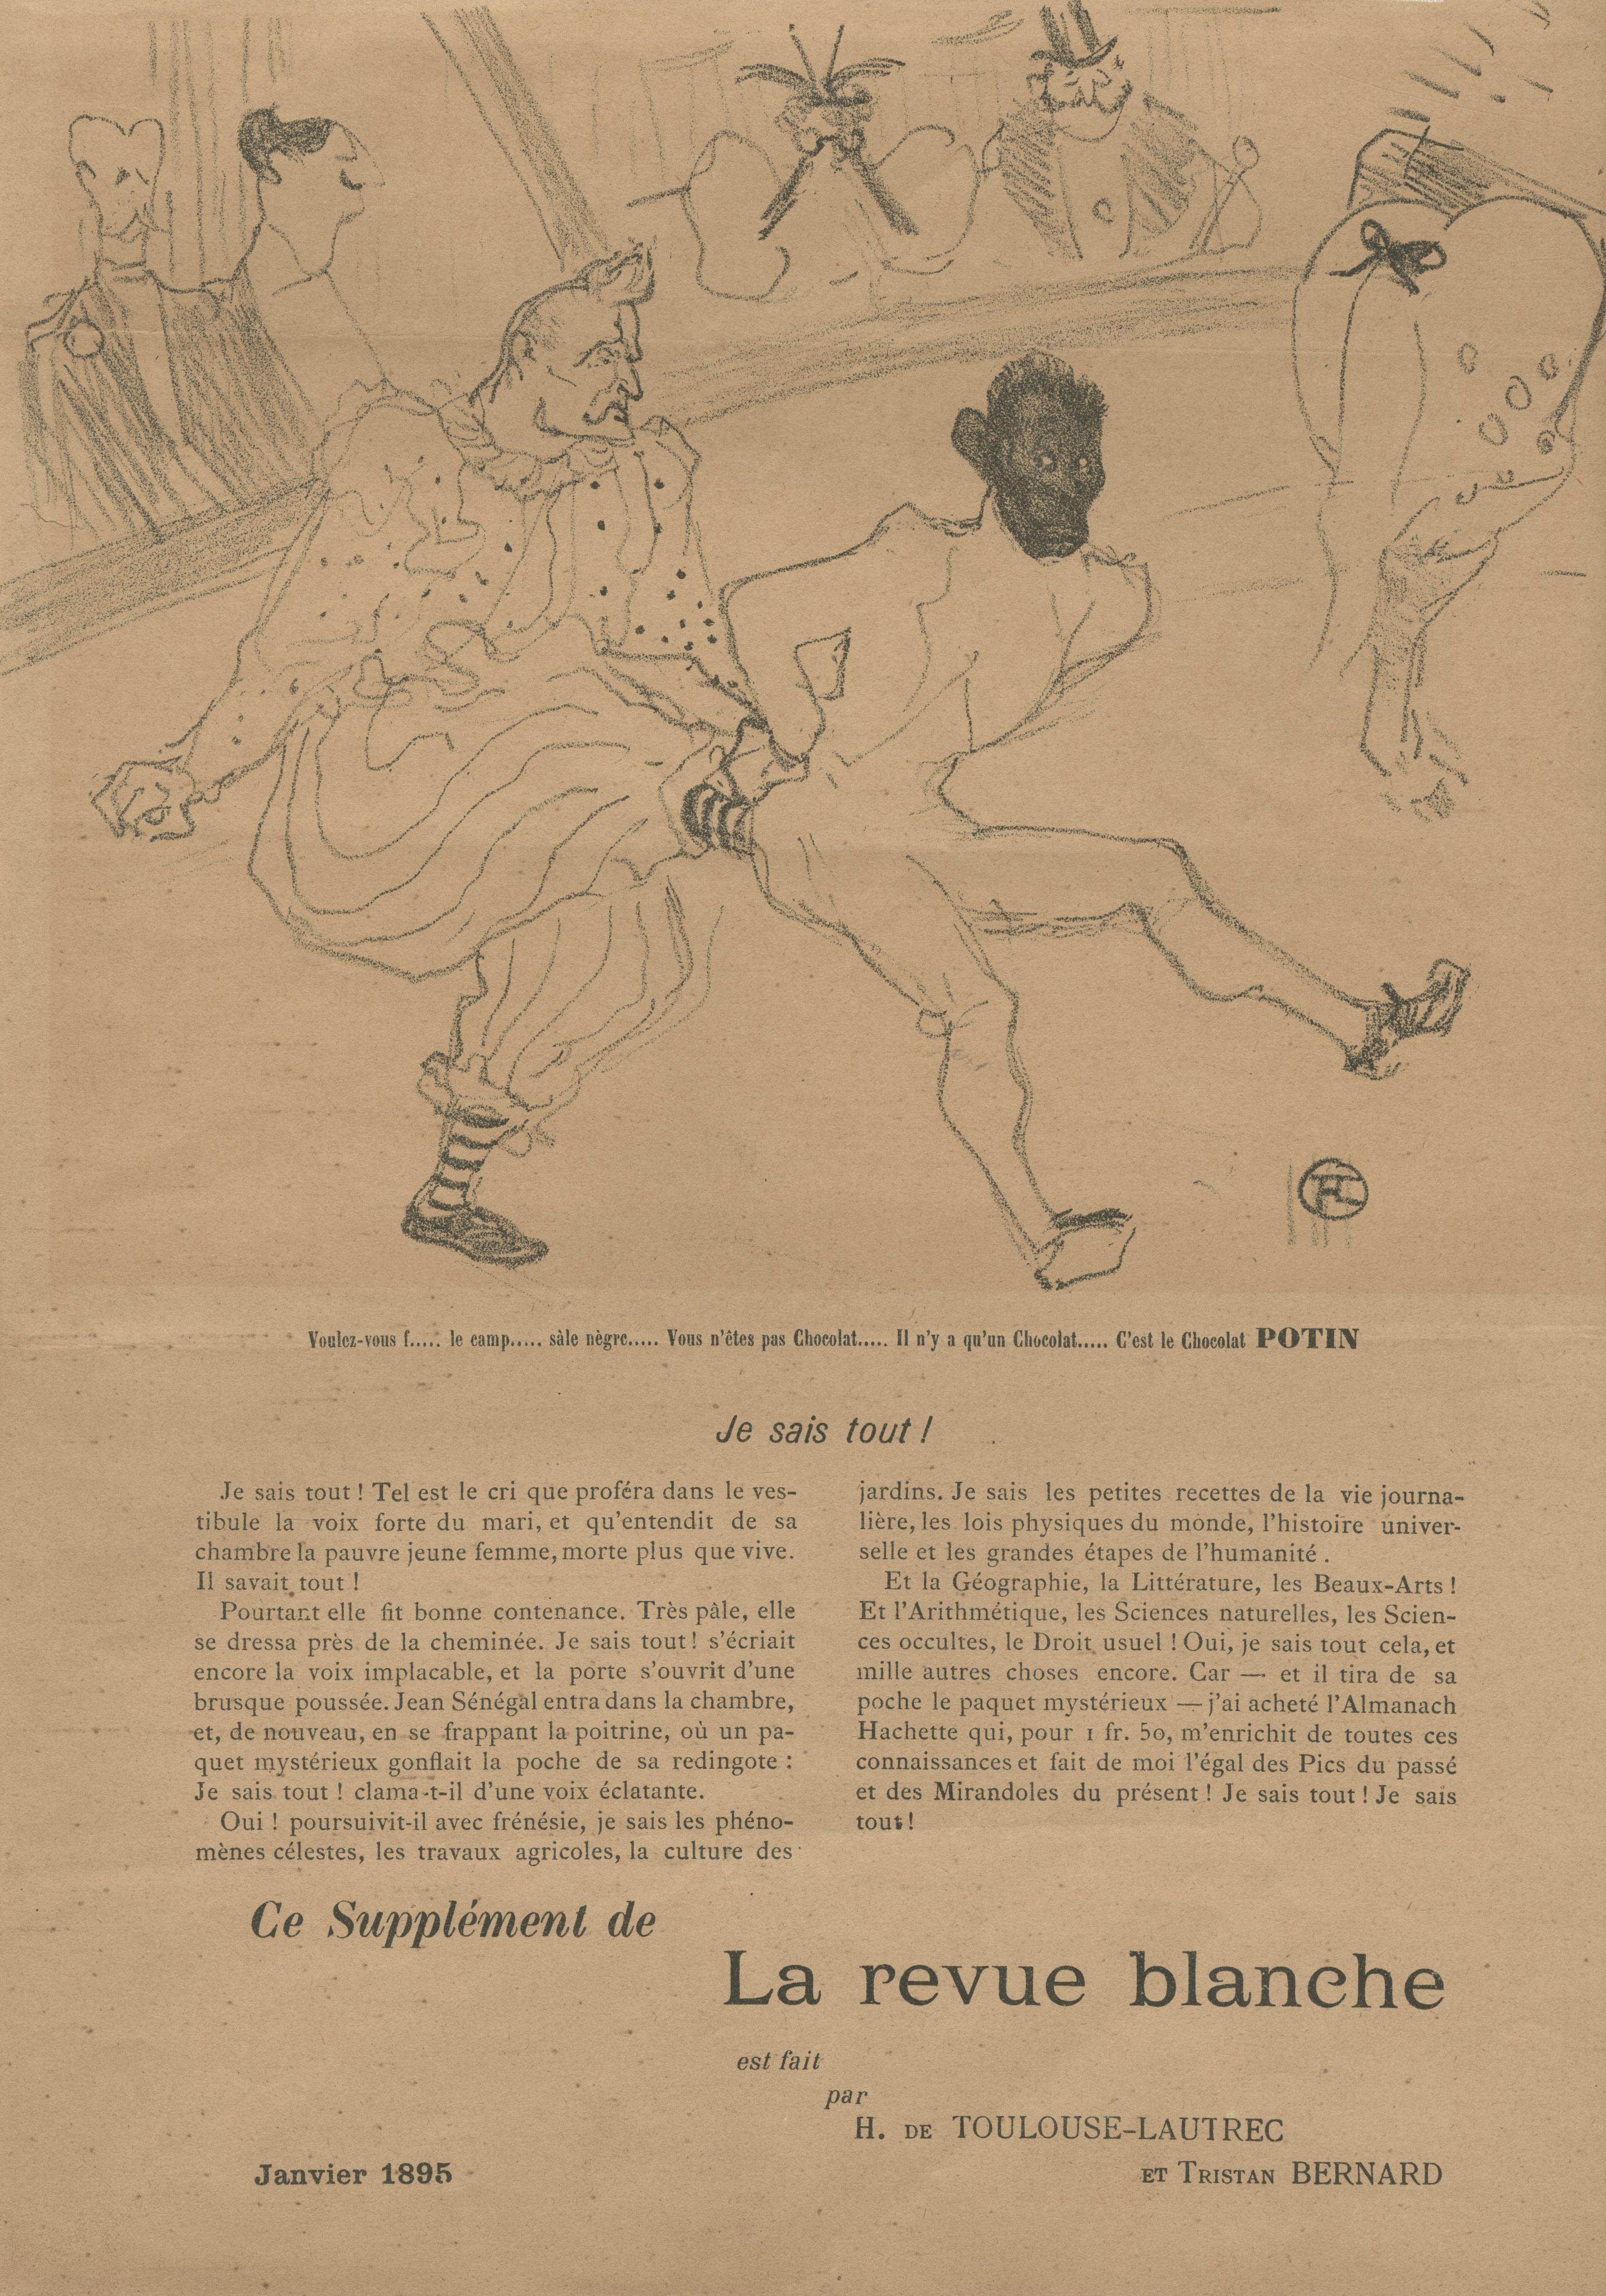 Anna Held, dans Toutes ces Dames au Theatre, recto and Footit et Chocolat, verso
Lithograph, printed on newsprint, 1894
Monogramed in the stone (see photo)
Published in La revue Blanche, in the NIB supplement which accompanied the January 1895